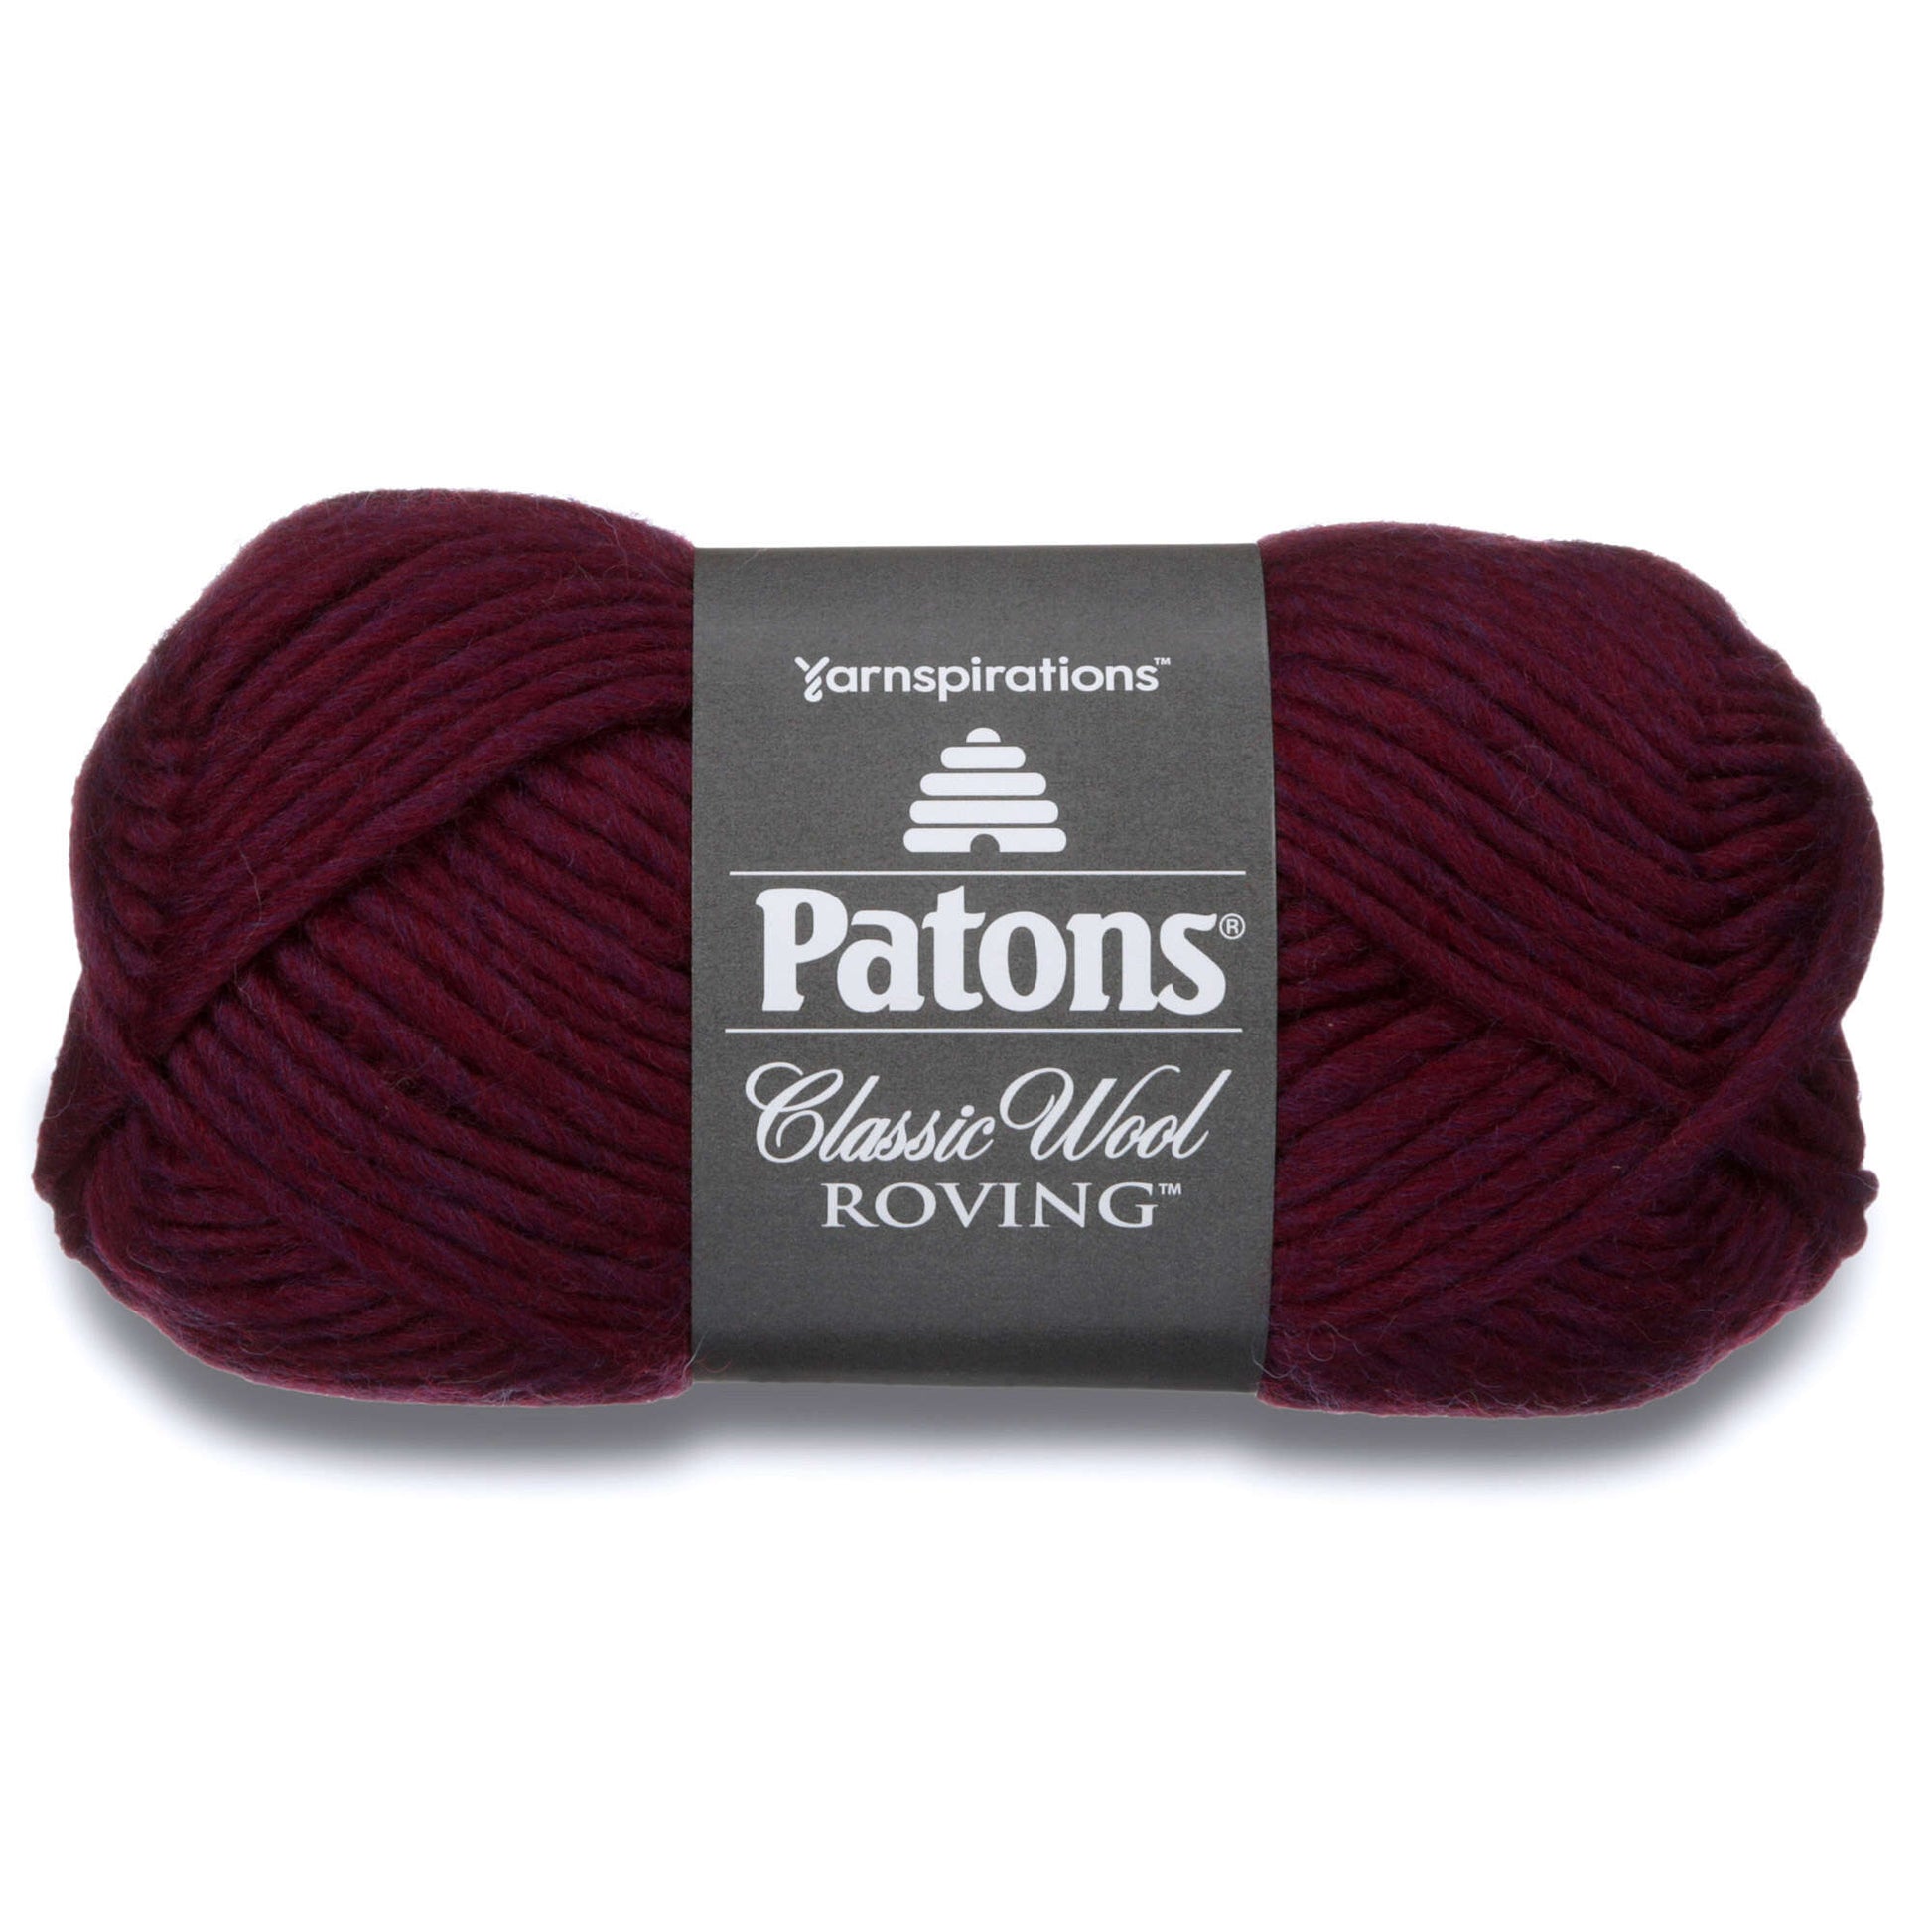 Patons Classic Wool Worsted Giveaway - Win 5 skeins on Moogly!